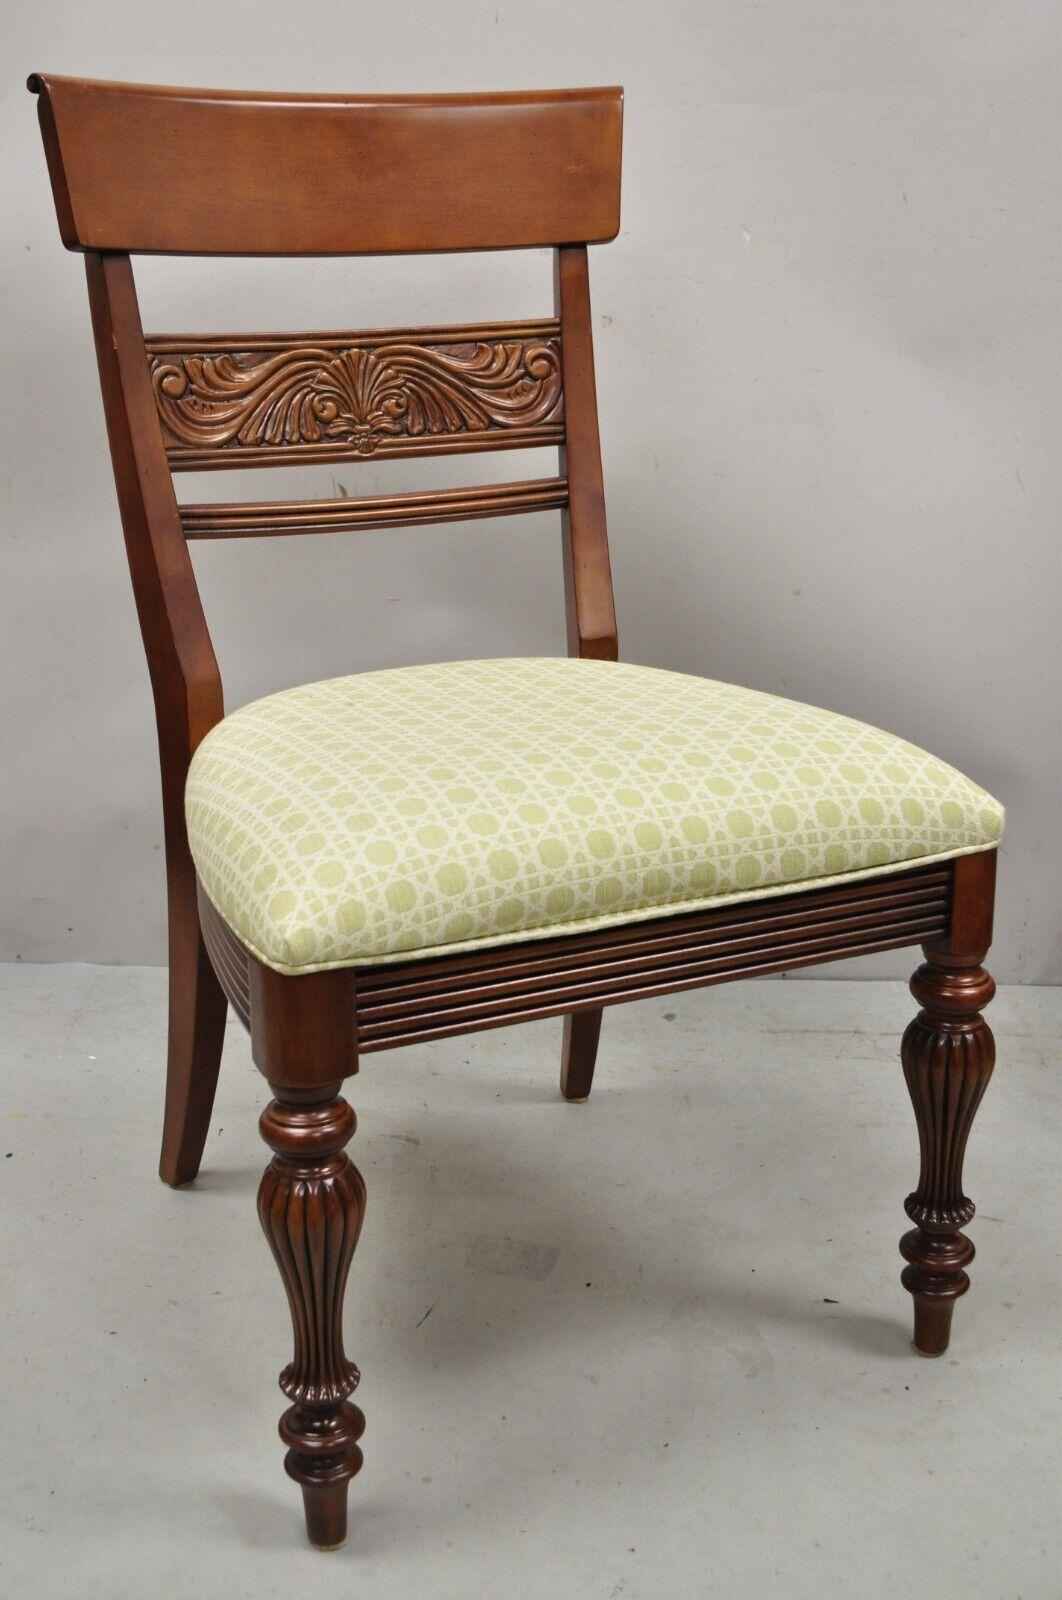 Ethan Allen British Classics Mackenzie Dining Side Chair 29-6500 - Single. Item features a green upholstered seat, solid wood frame, beautiful wood grain, nicely carved details, original label, tapered legs. Circa 2008. Measurements: 37